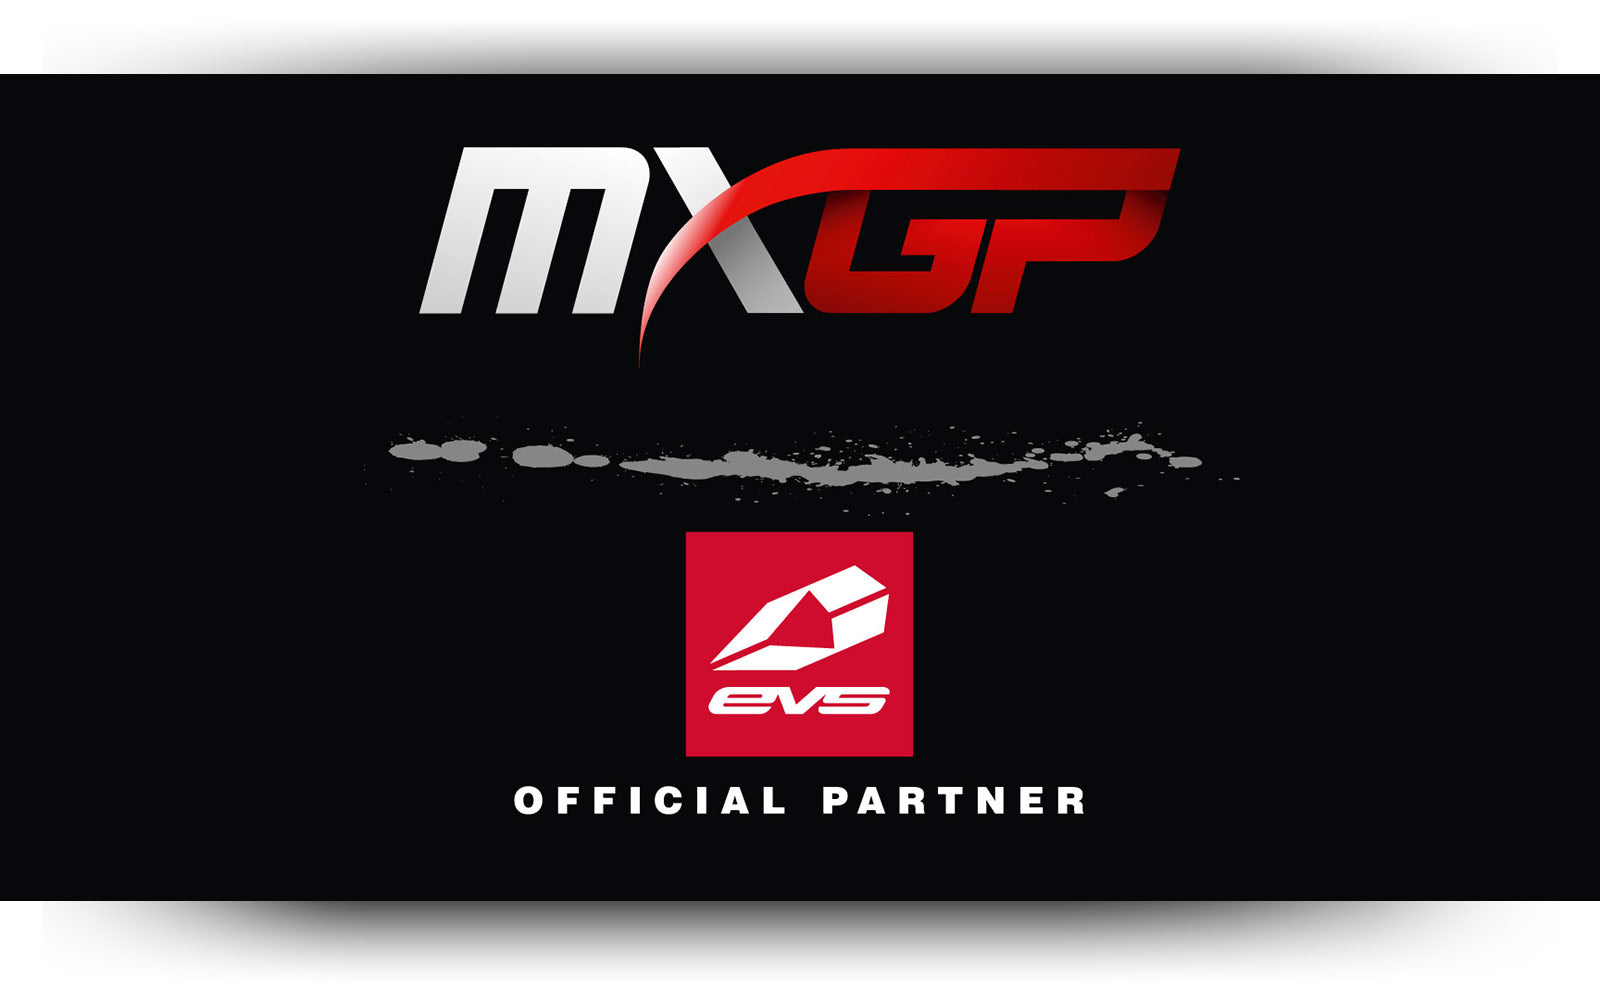 MXGP Welcomes EVS SPORTS